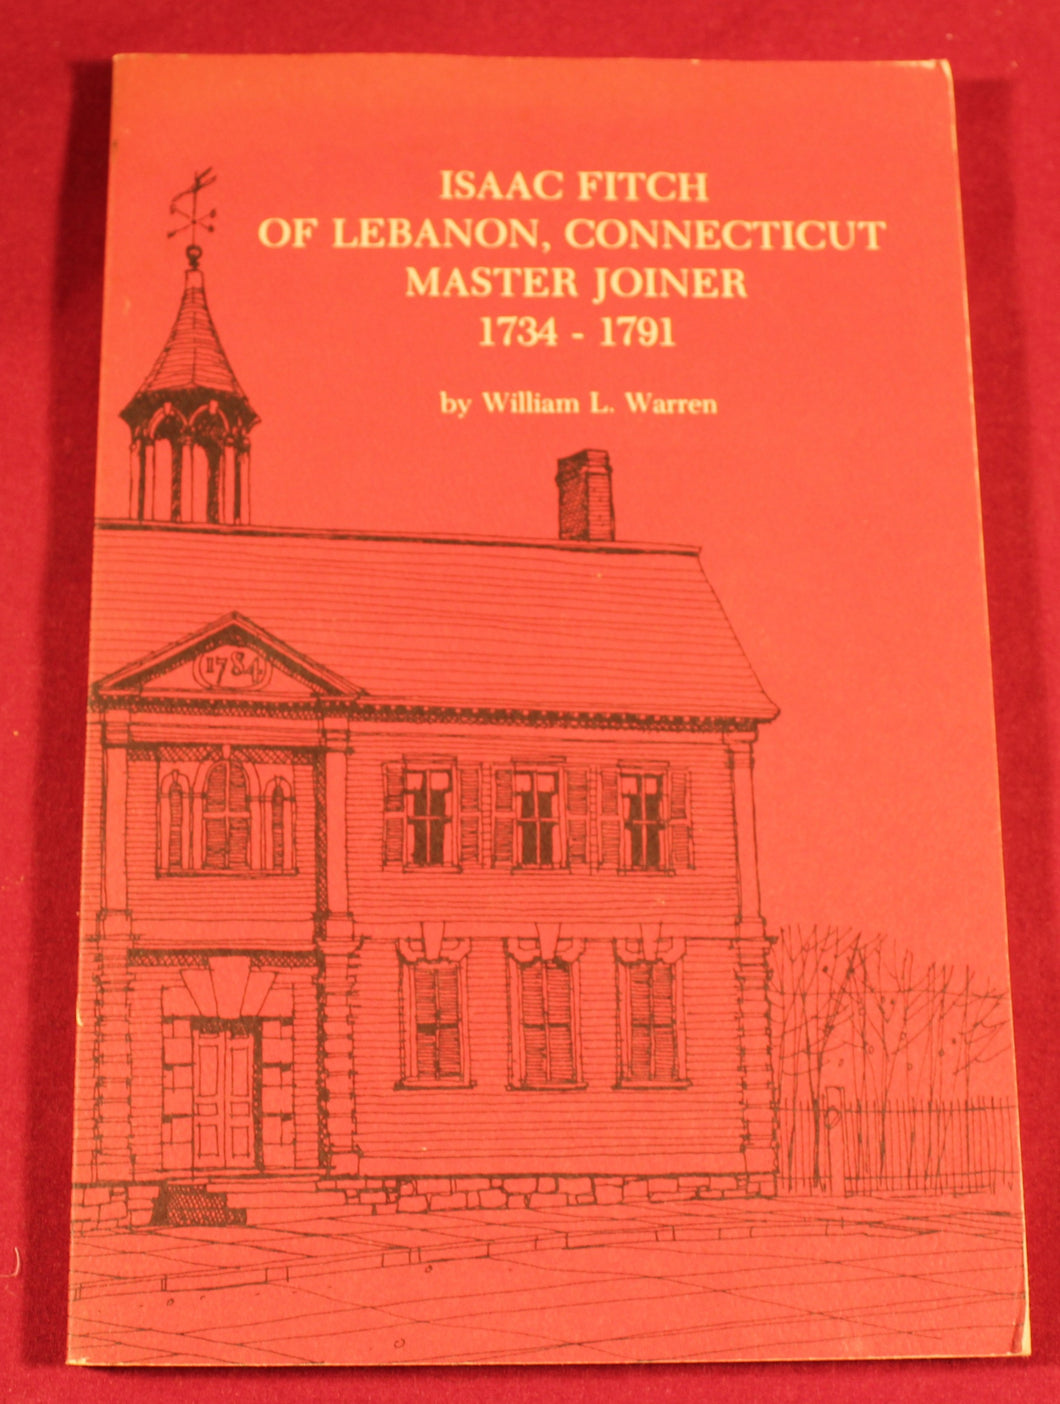 Isaac Fitch of Lebanon, CT Master Joiner 1734-91 by William Warren 1978